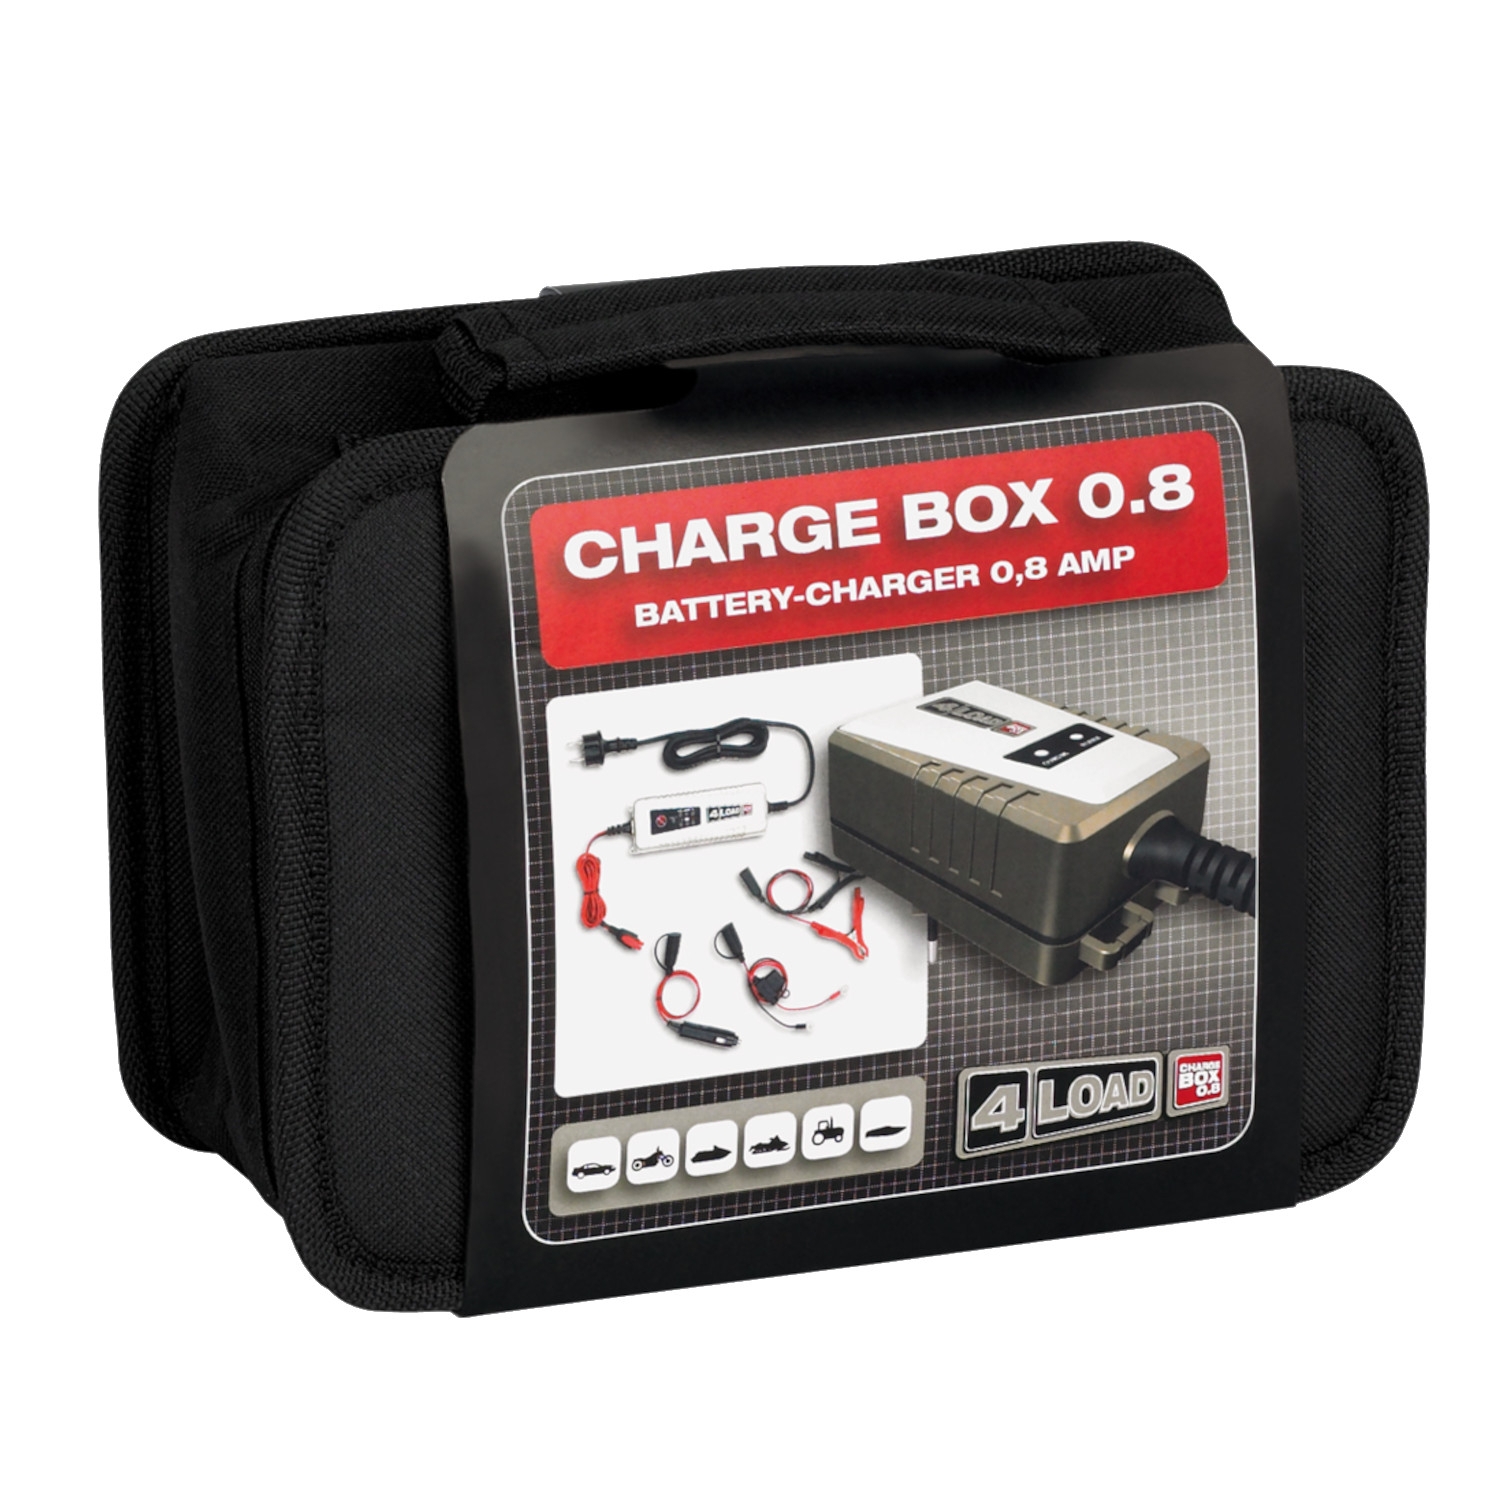 4Load ChargeBox CB-0.8